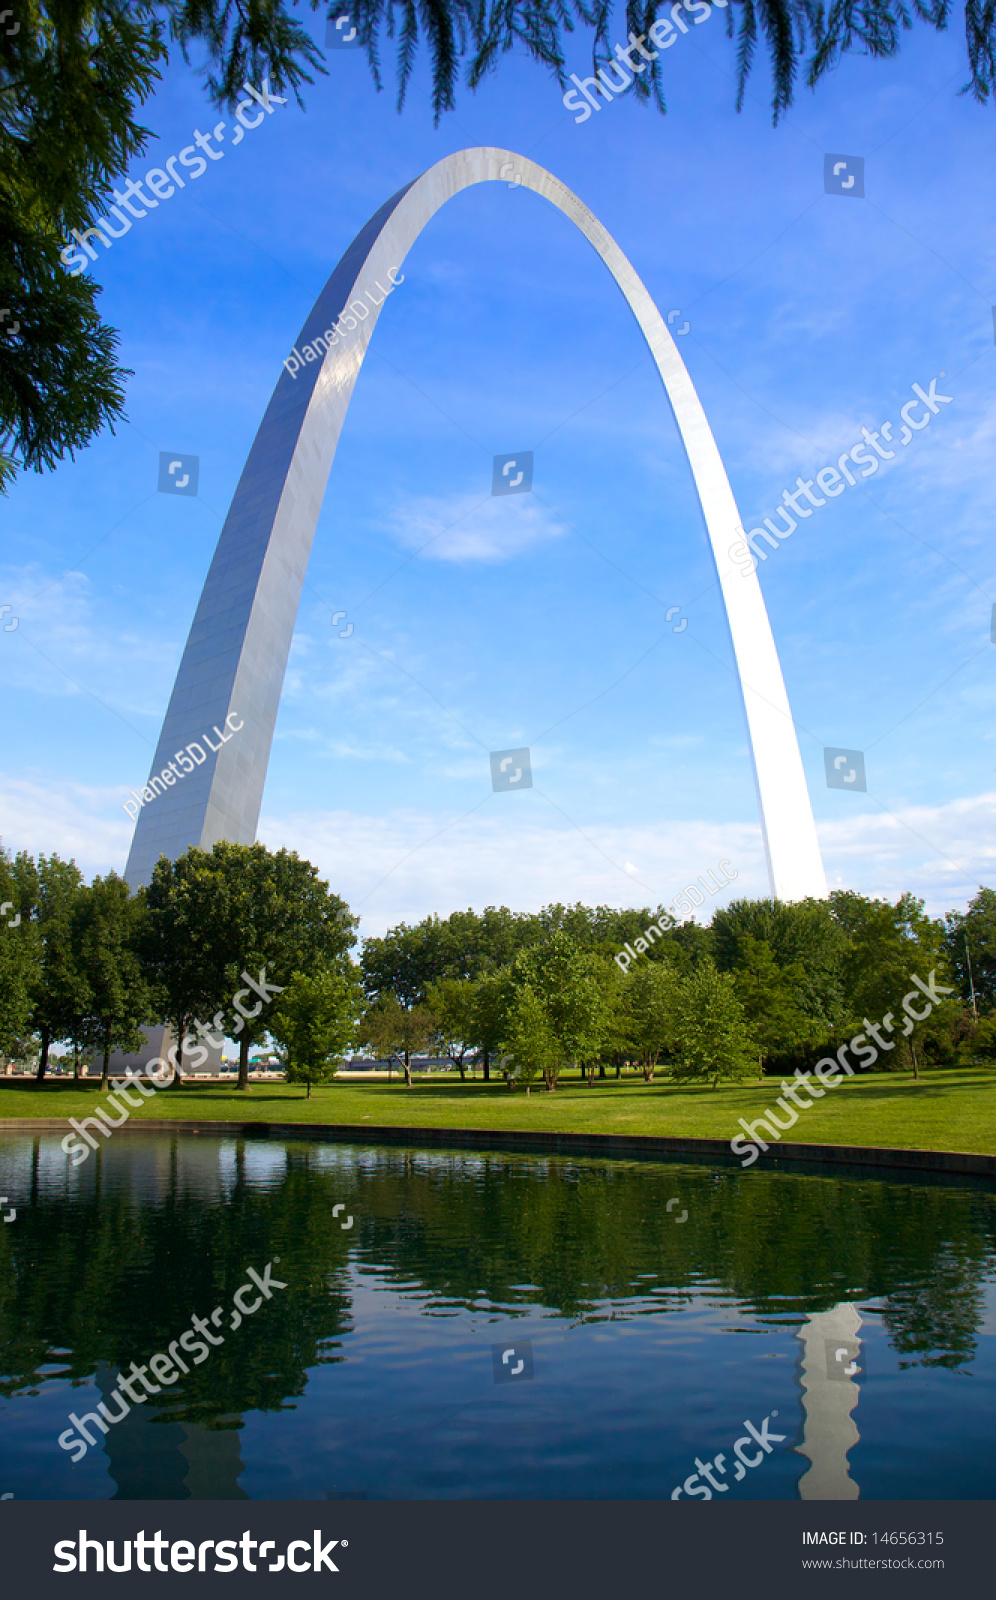 An Interesting View Of The St. Louis Arch - Gateway To The West - The Jefferson National ...